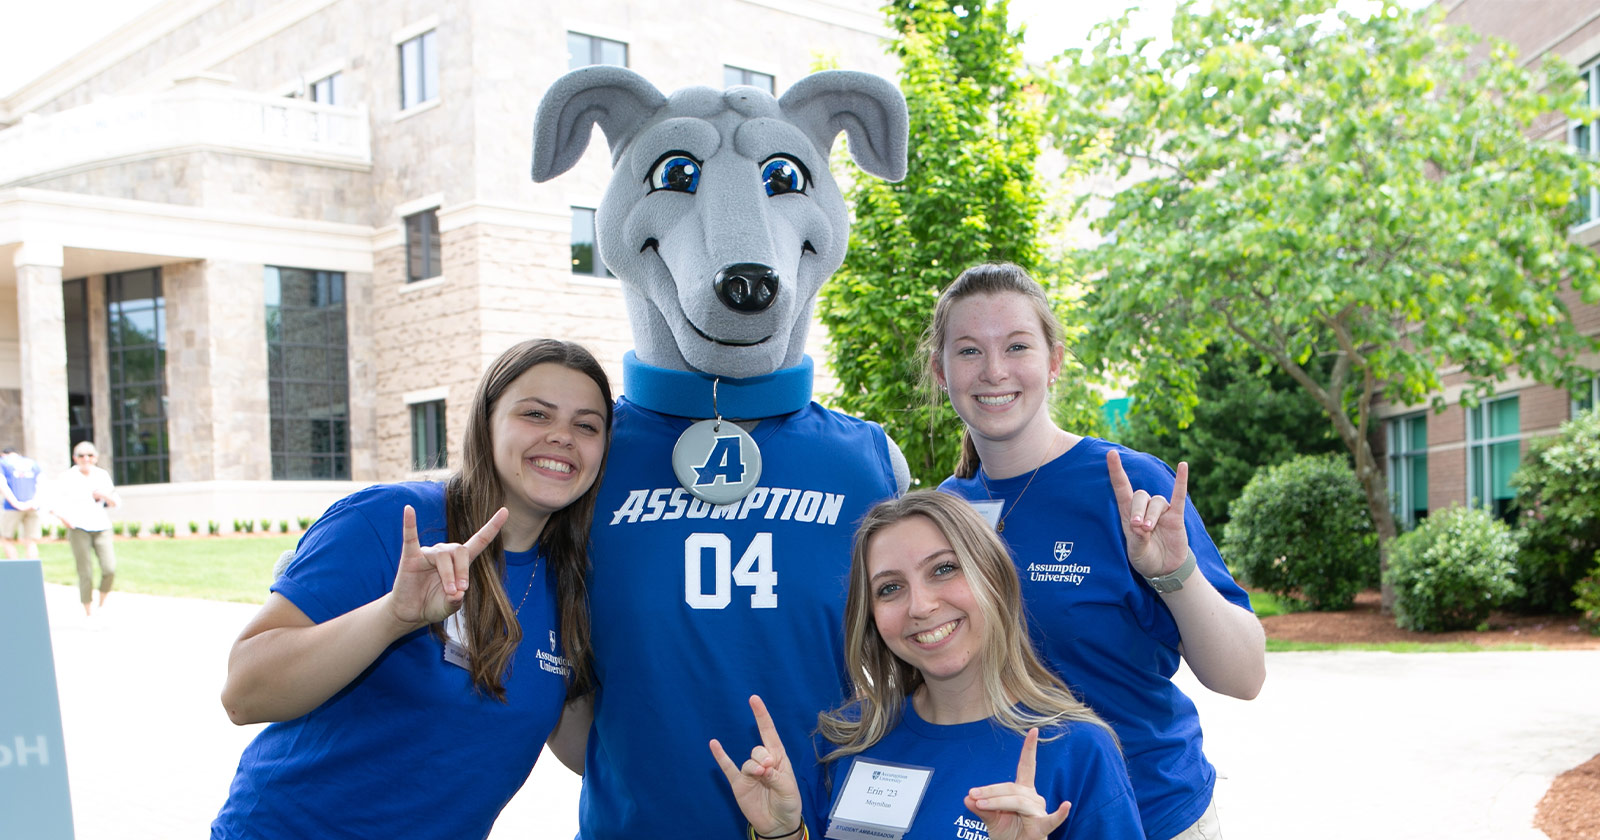 Assumption University mascot Pierre poses with students.